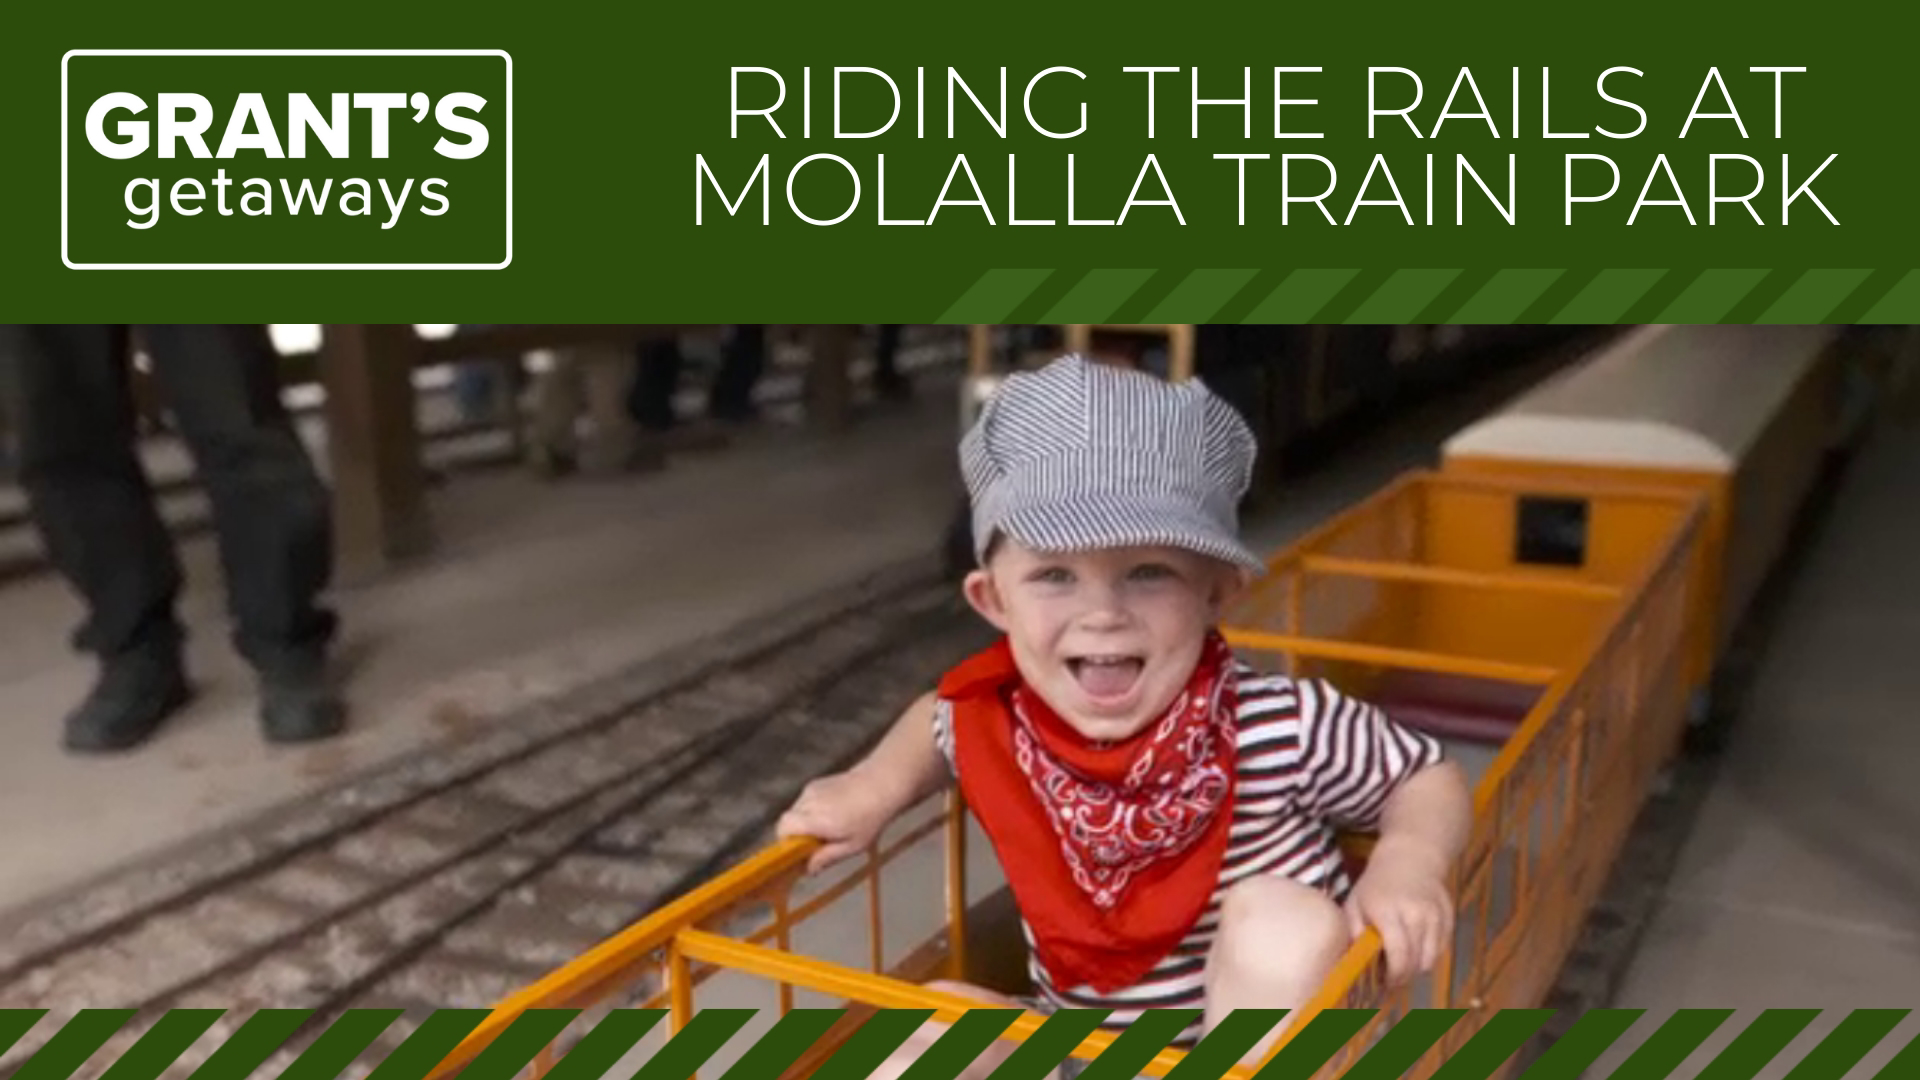 Molalla Train Park sprawls across four acres in Clackamas County. Families can hop aboard seven trains for a 10-minute ride.